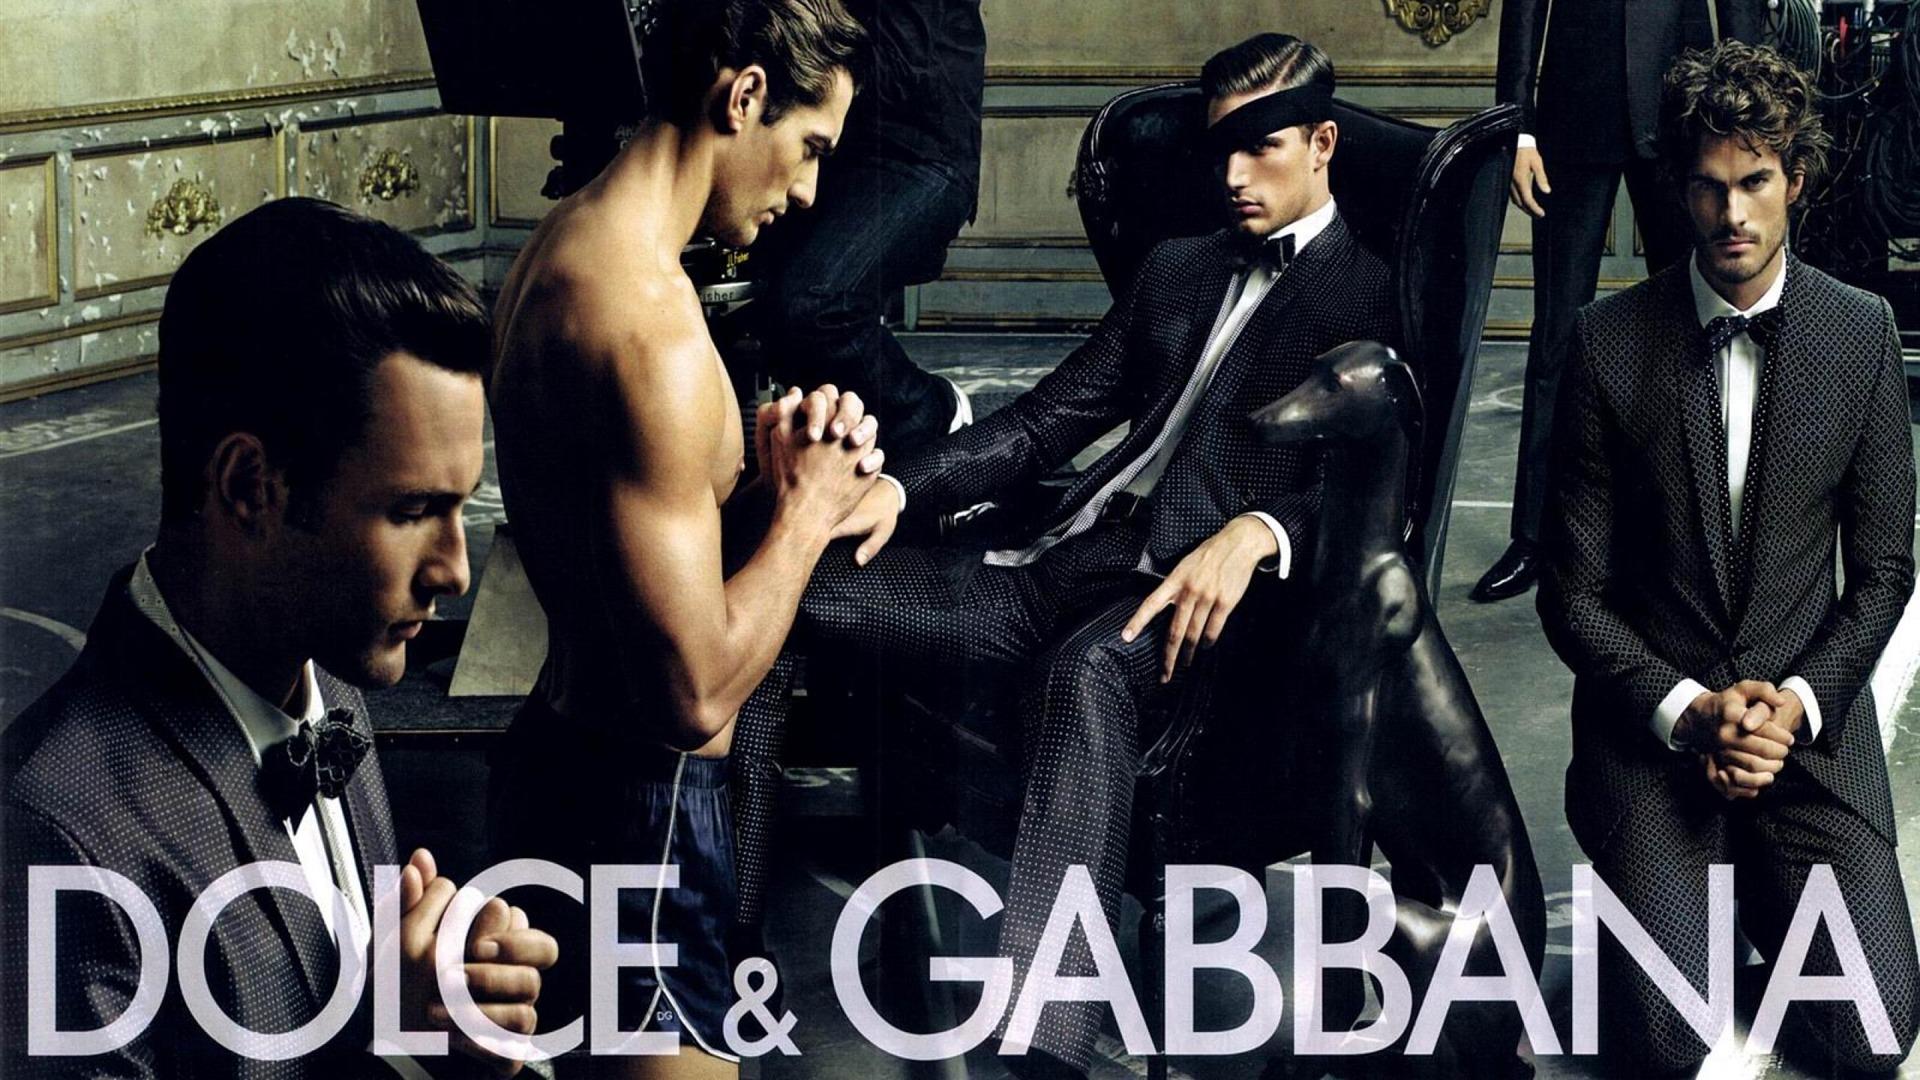 Dolce Gabbana Computer Wallpapers - Top Free Dolce Gabbana Computer ...